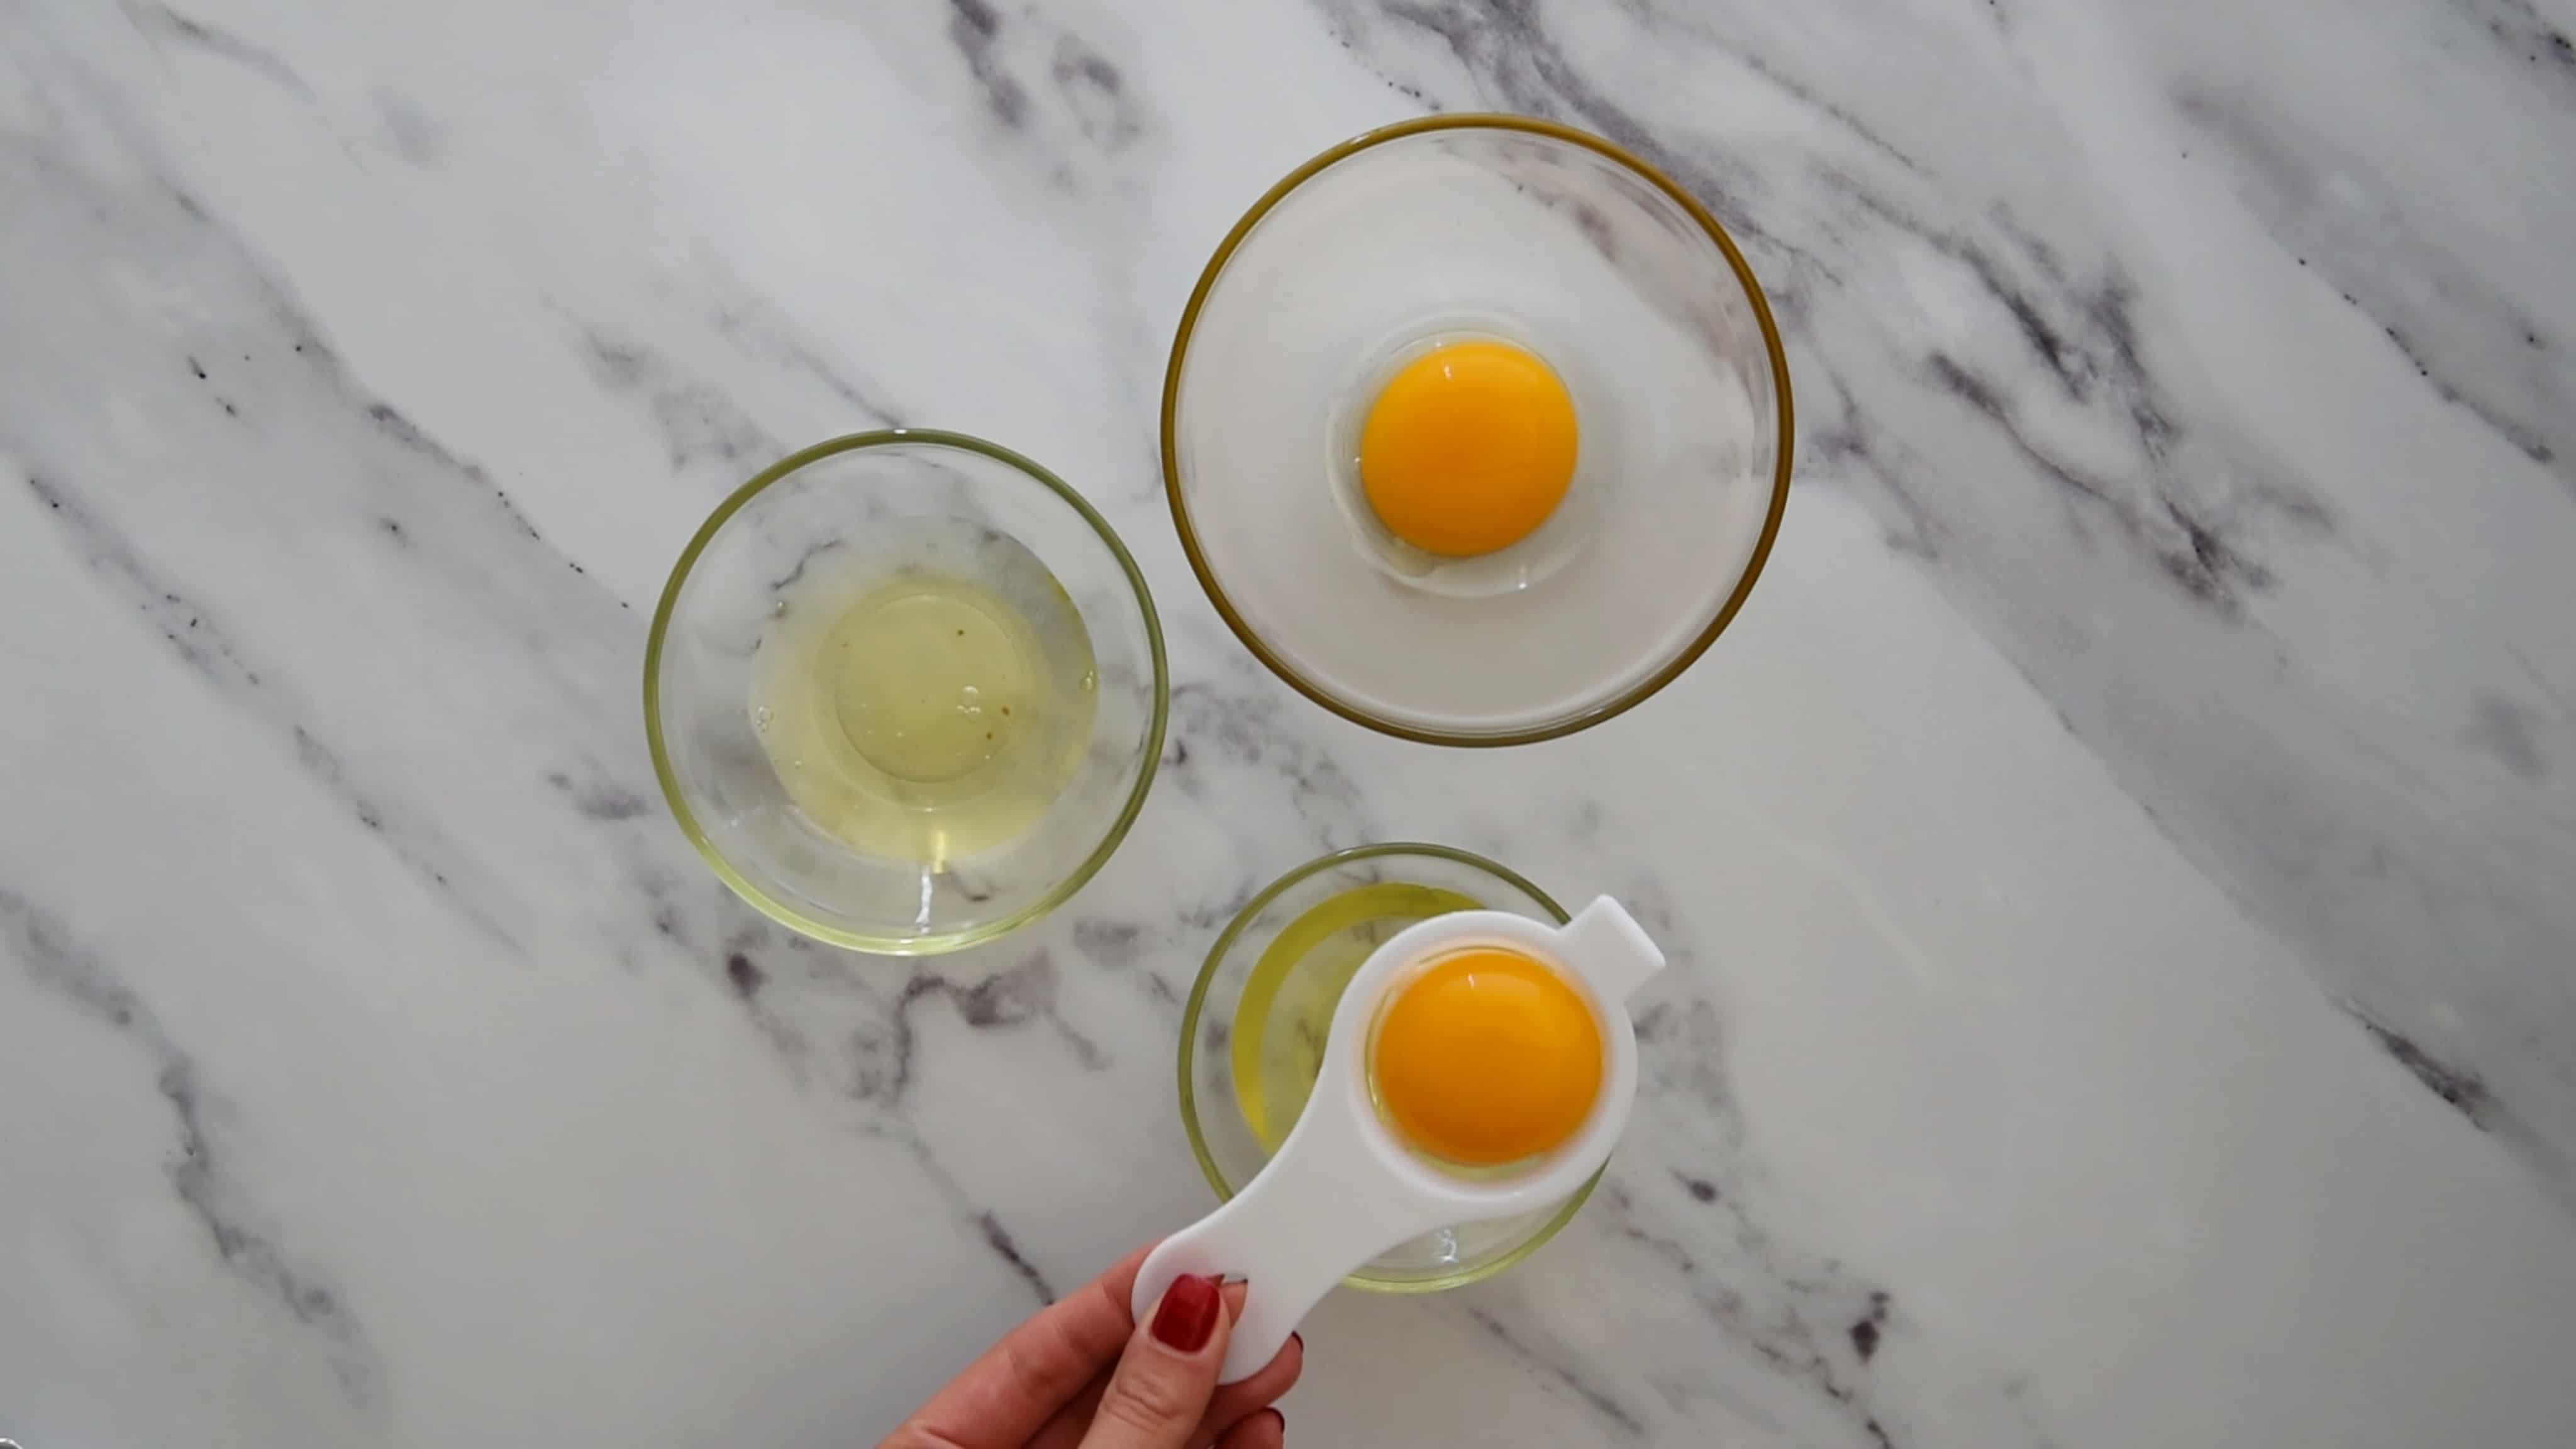 How to separate the egg whites